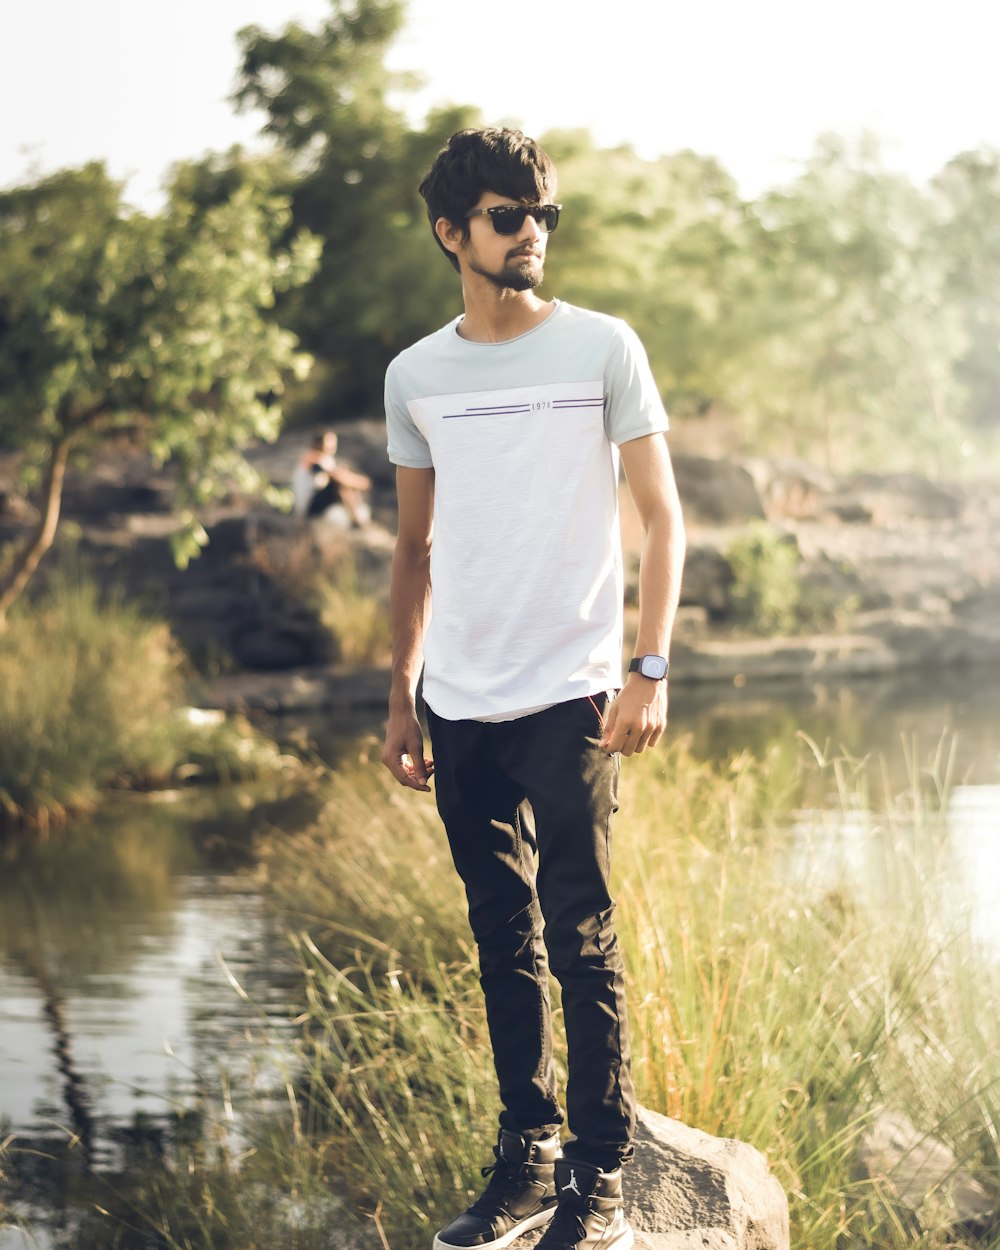 man in white crew neck t-shirt and black pants standing near river during daytime